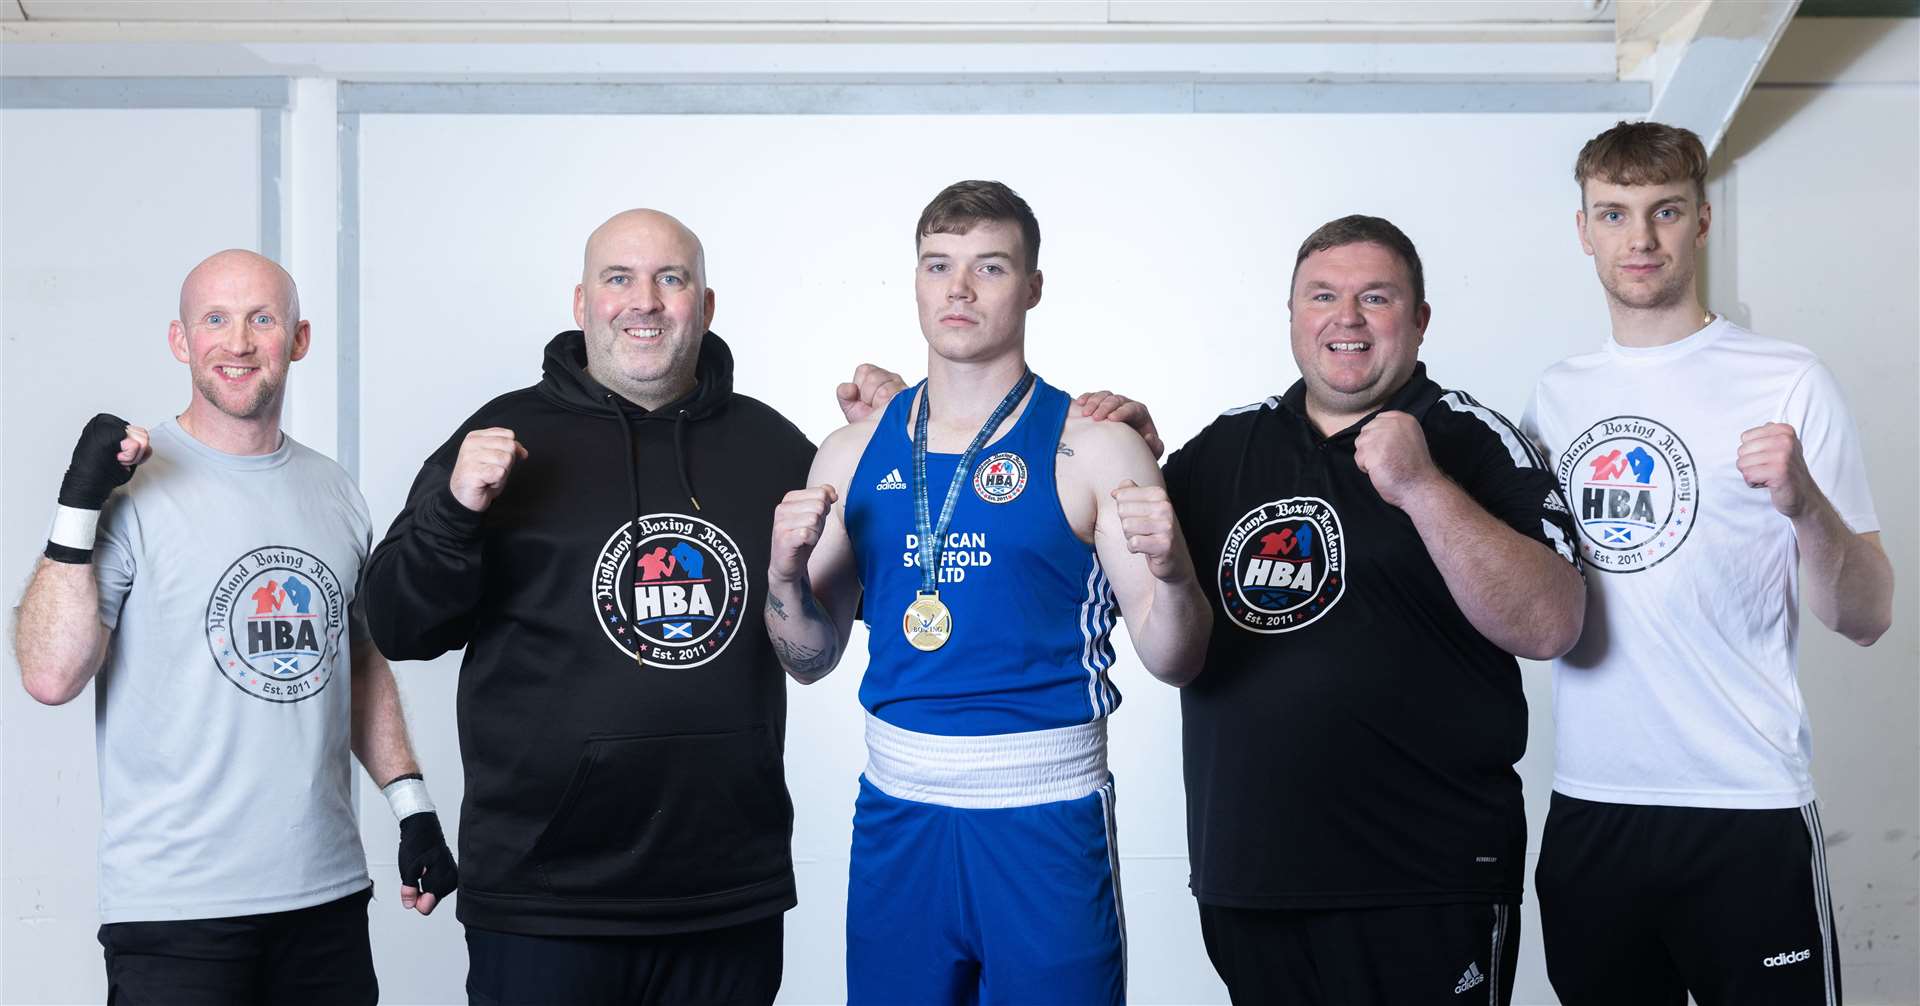 Highland Boxing Academy (HBA)'s Alexander McClymont was awarded the Development Championship title after his final opponent was ejected from the tournament.